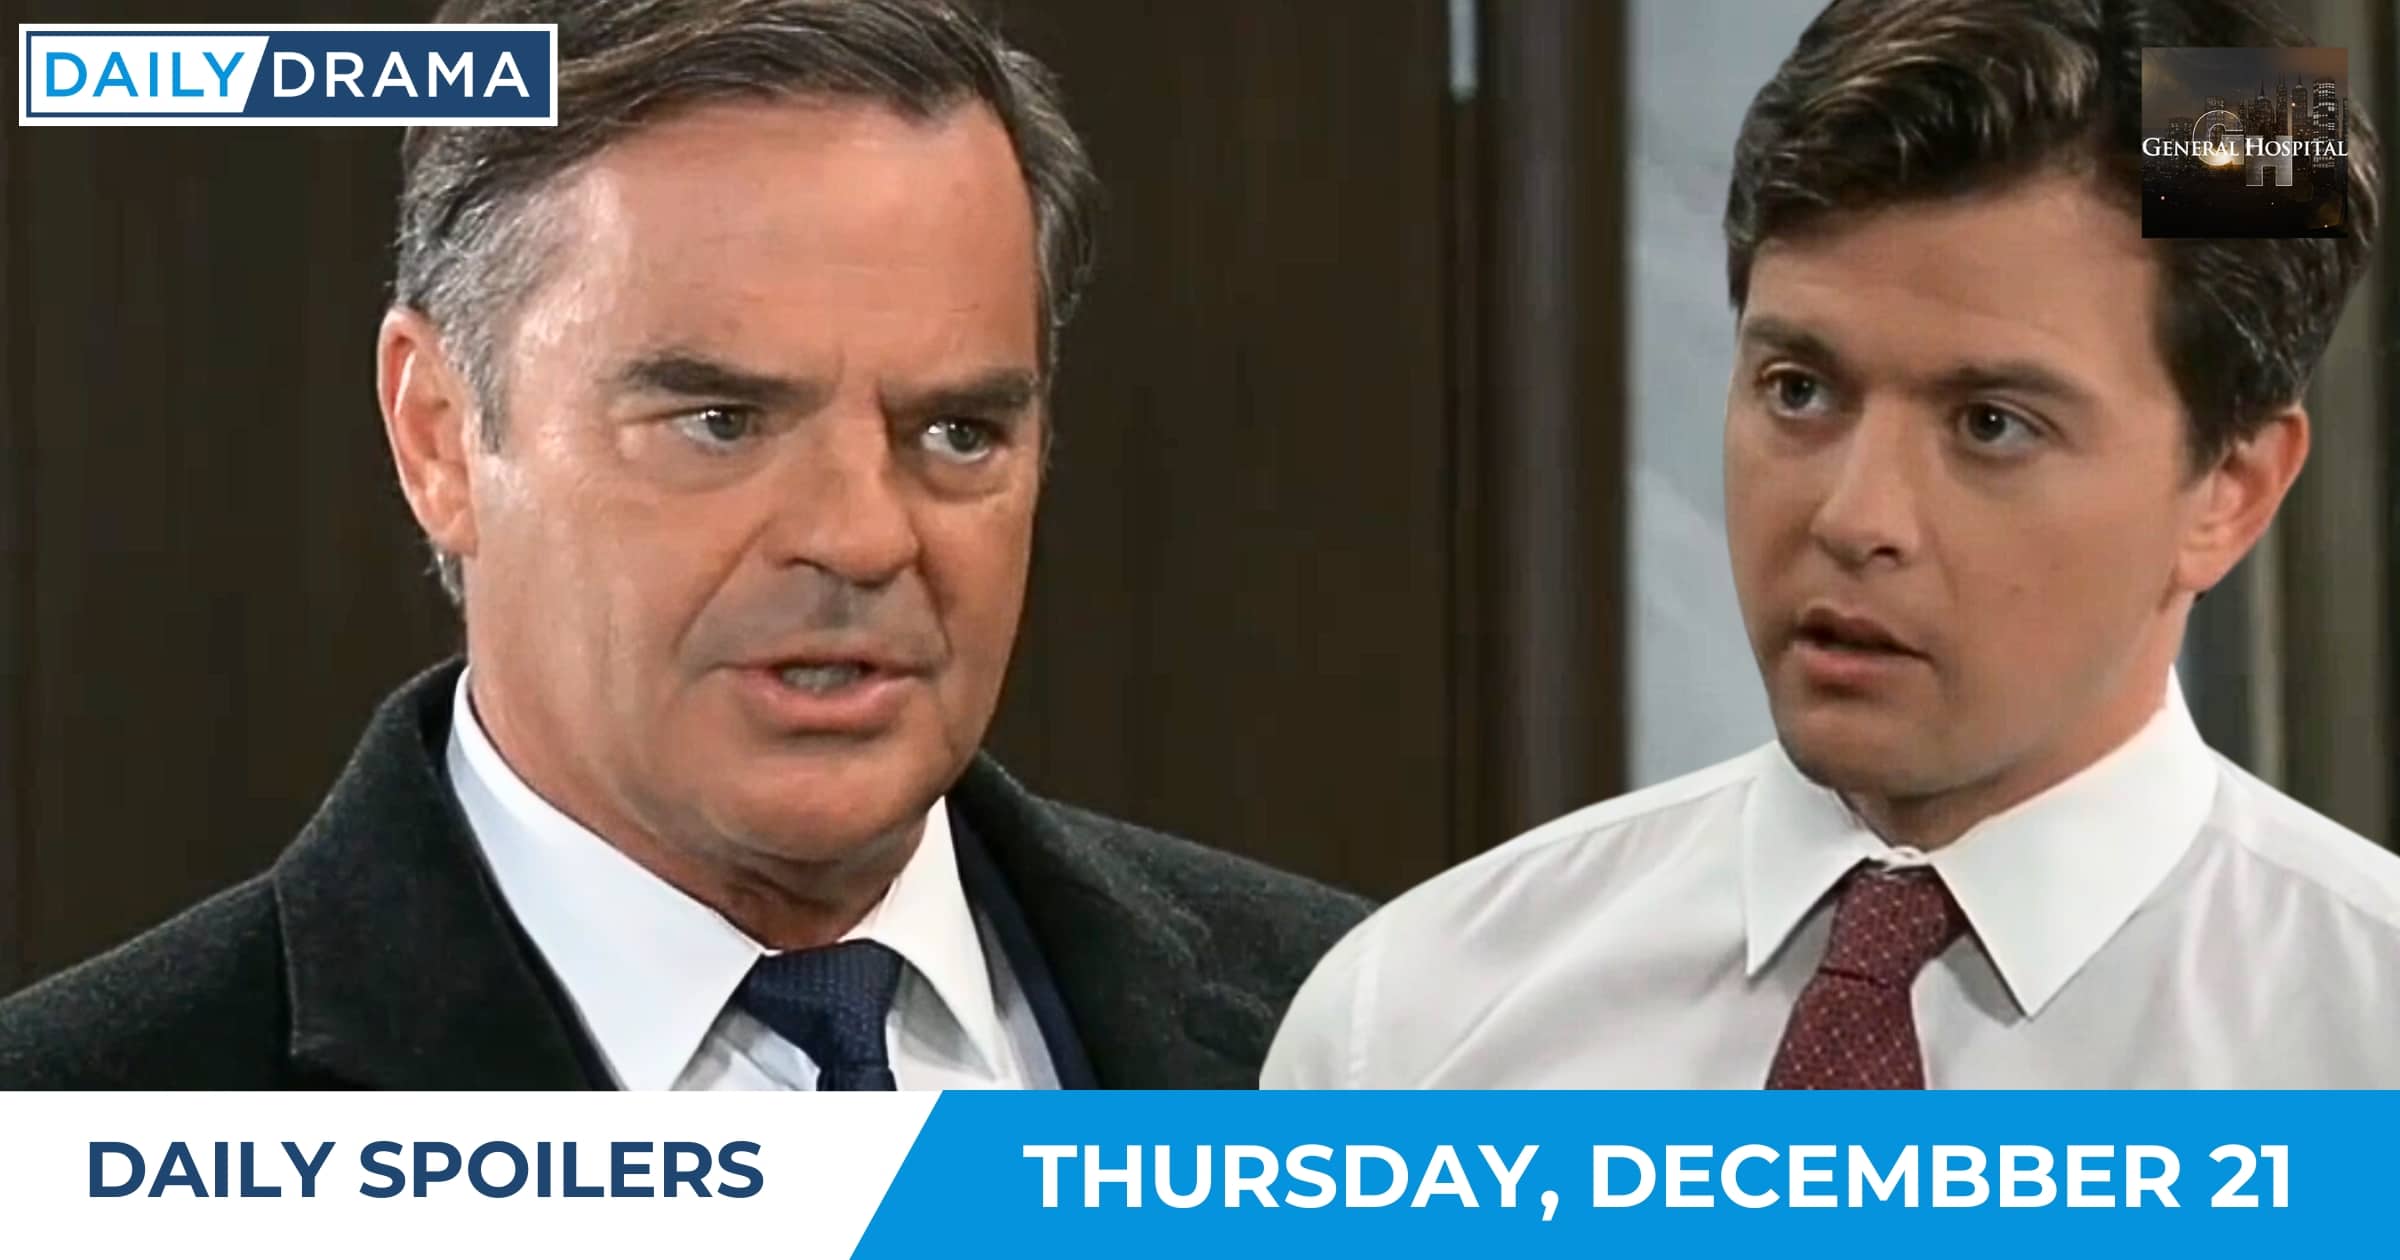 General Hospital Daily Spoilers - Dec 21 - Ned and Michael